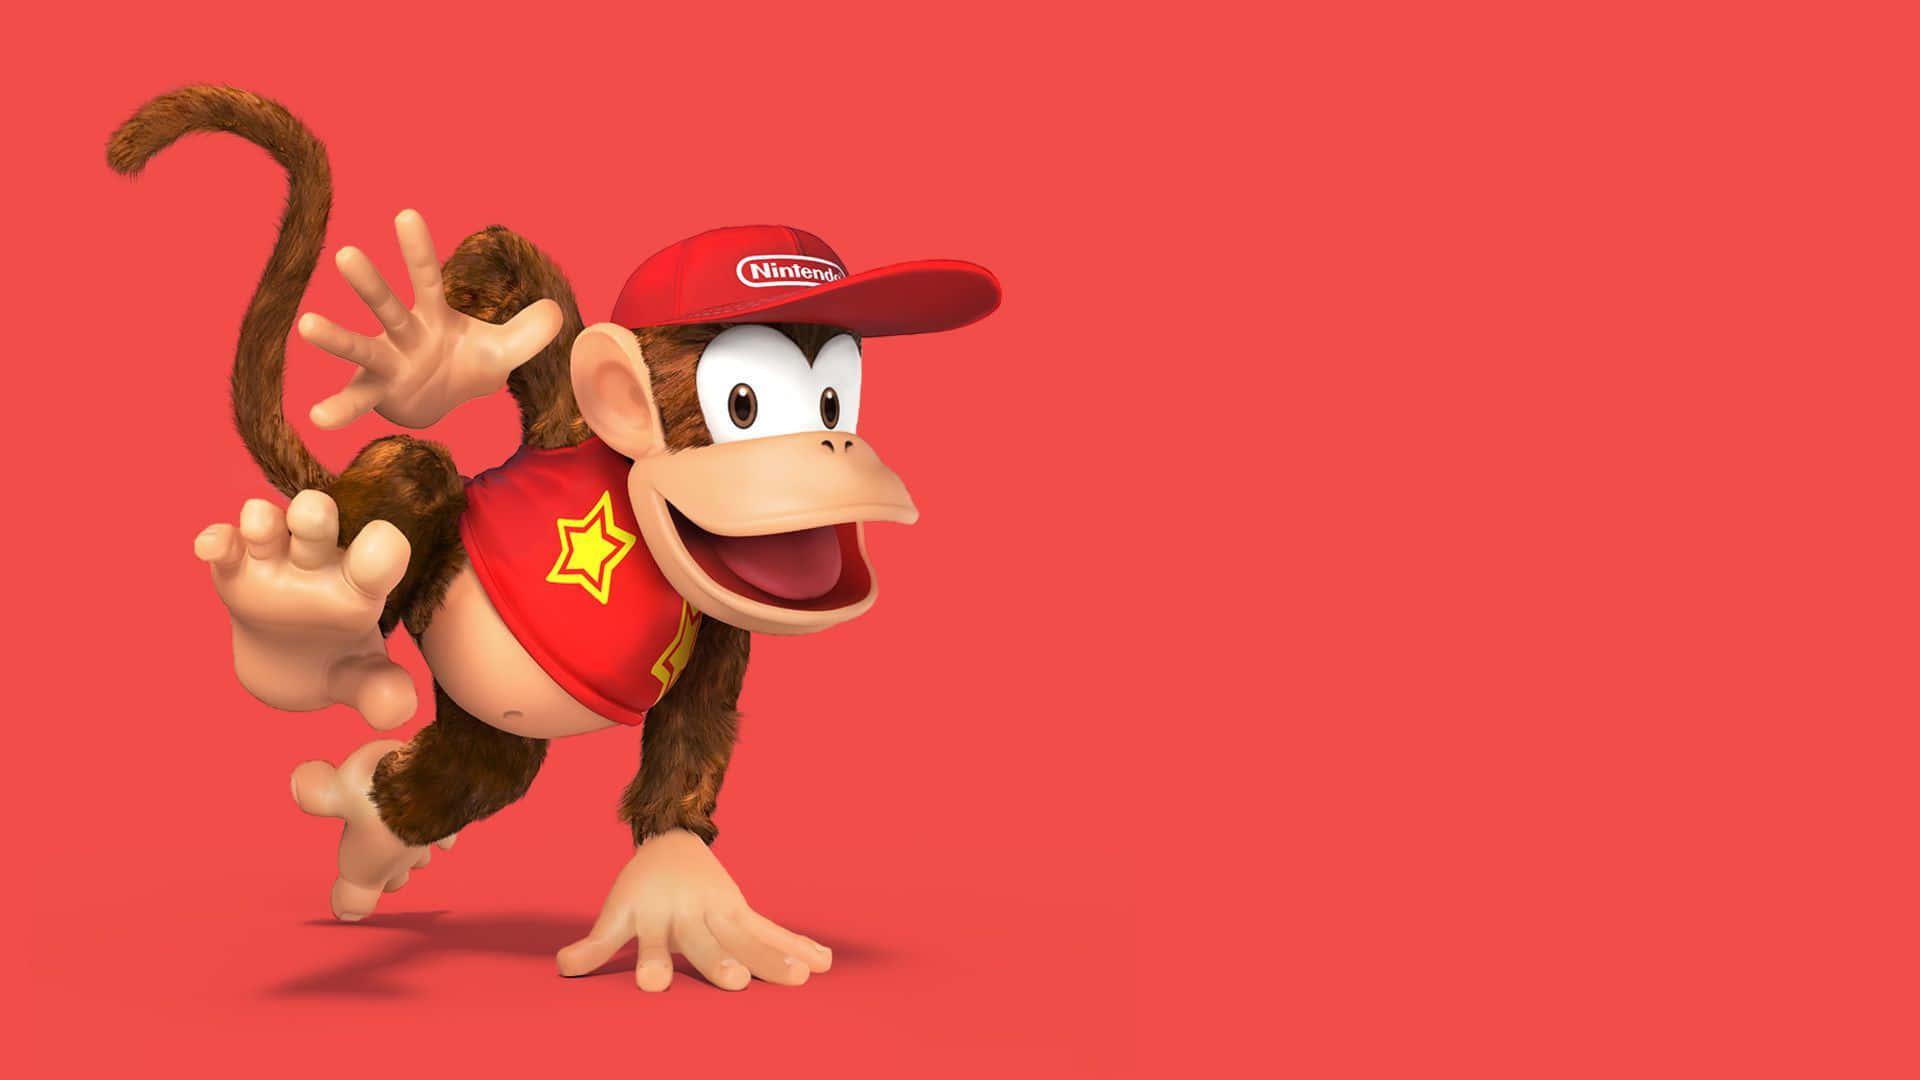 Diddy Kong: The High-Flying Hero Wallpaper